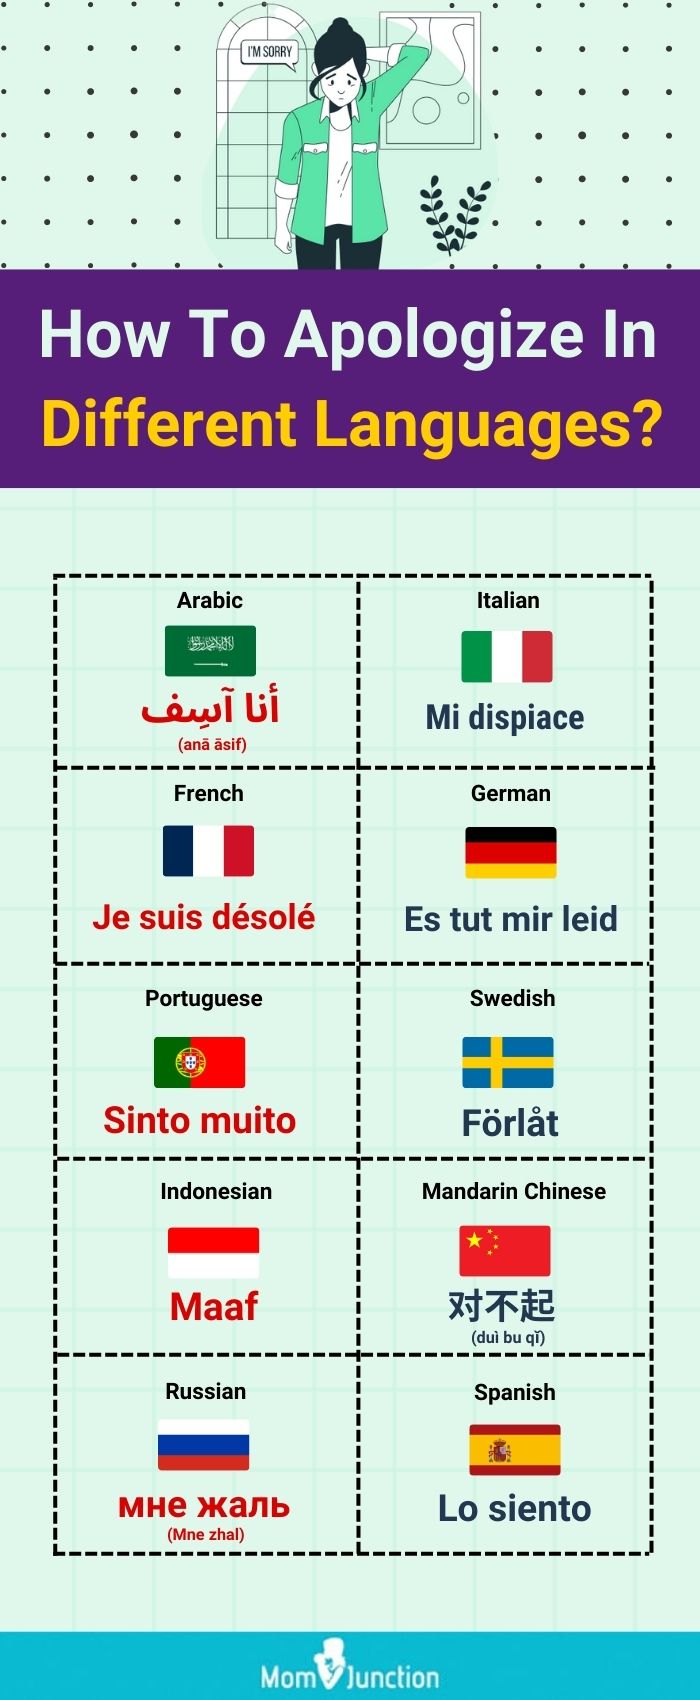 how to apologize in different languages (infographic)